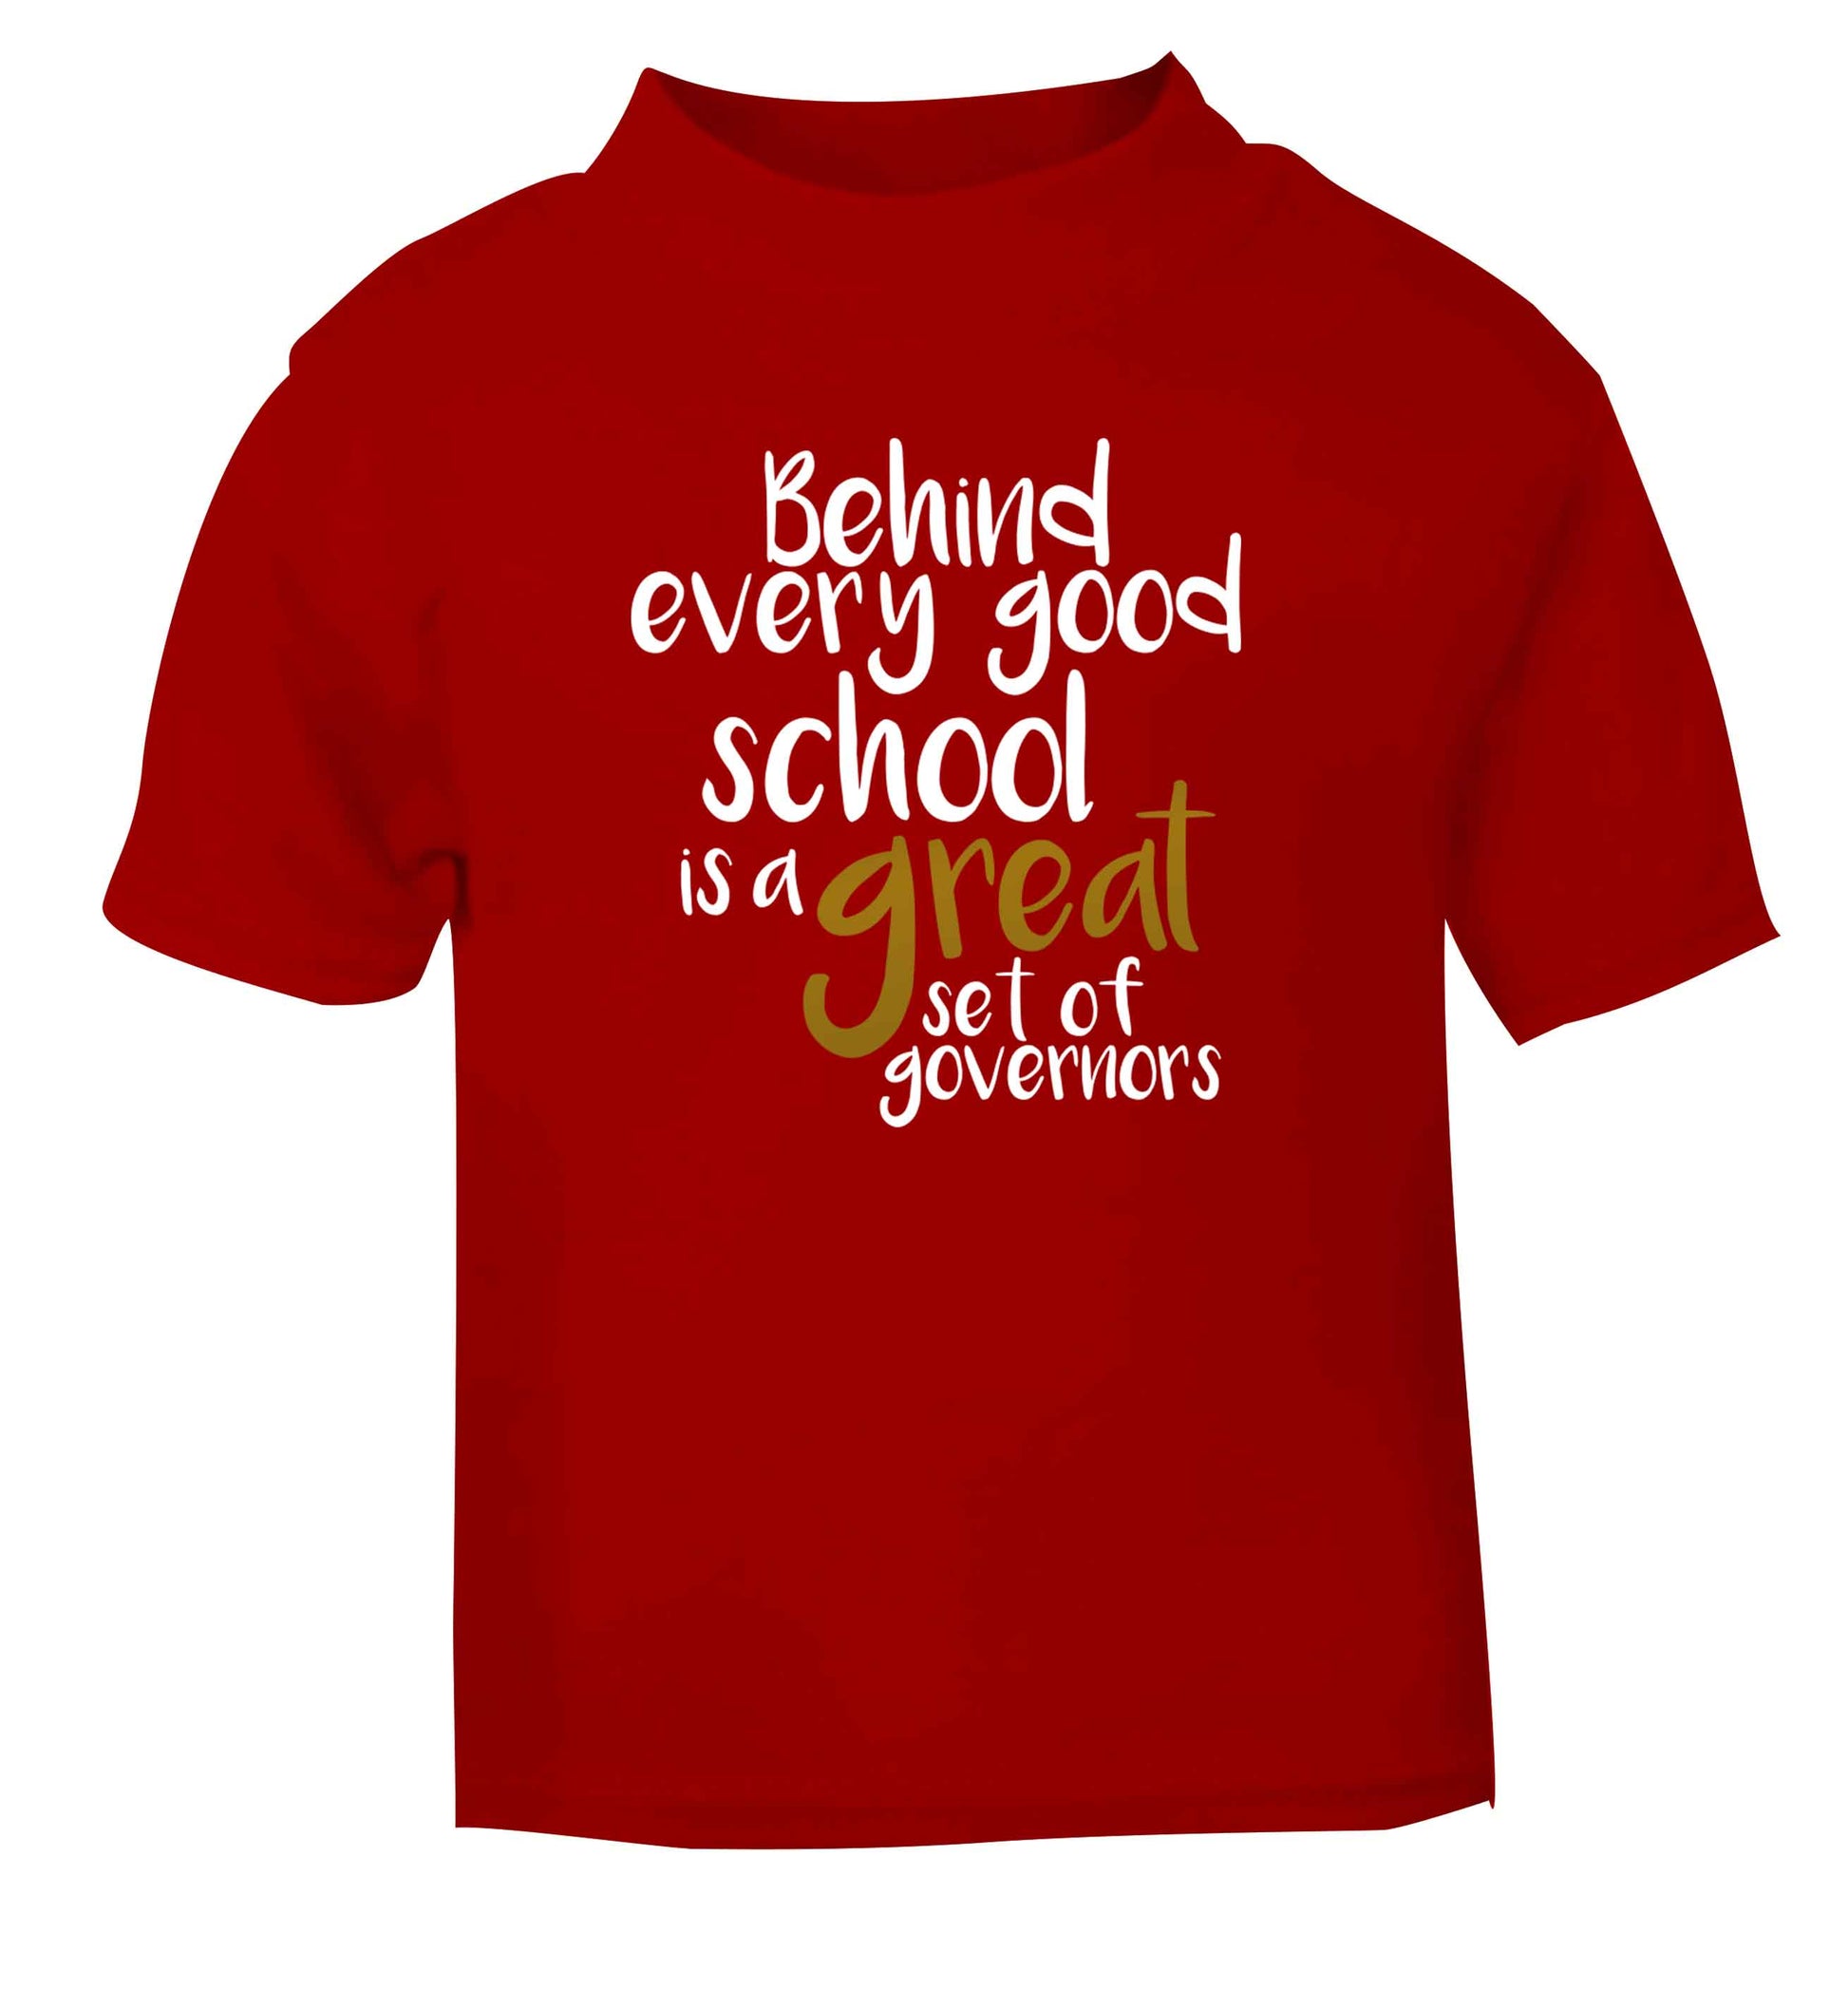 Behind every good school is a great set of governors red Baby Toddler Tshirt 2 Years